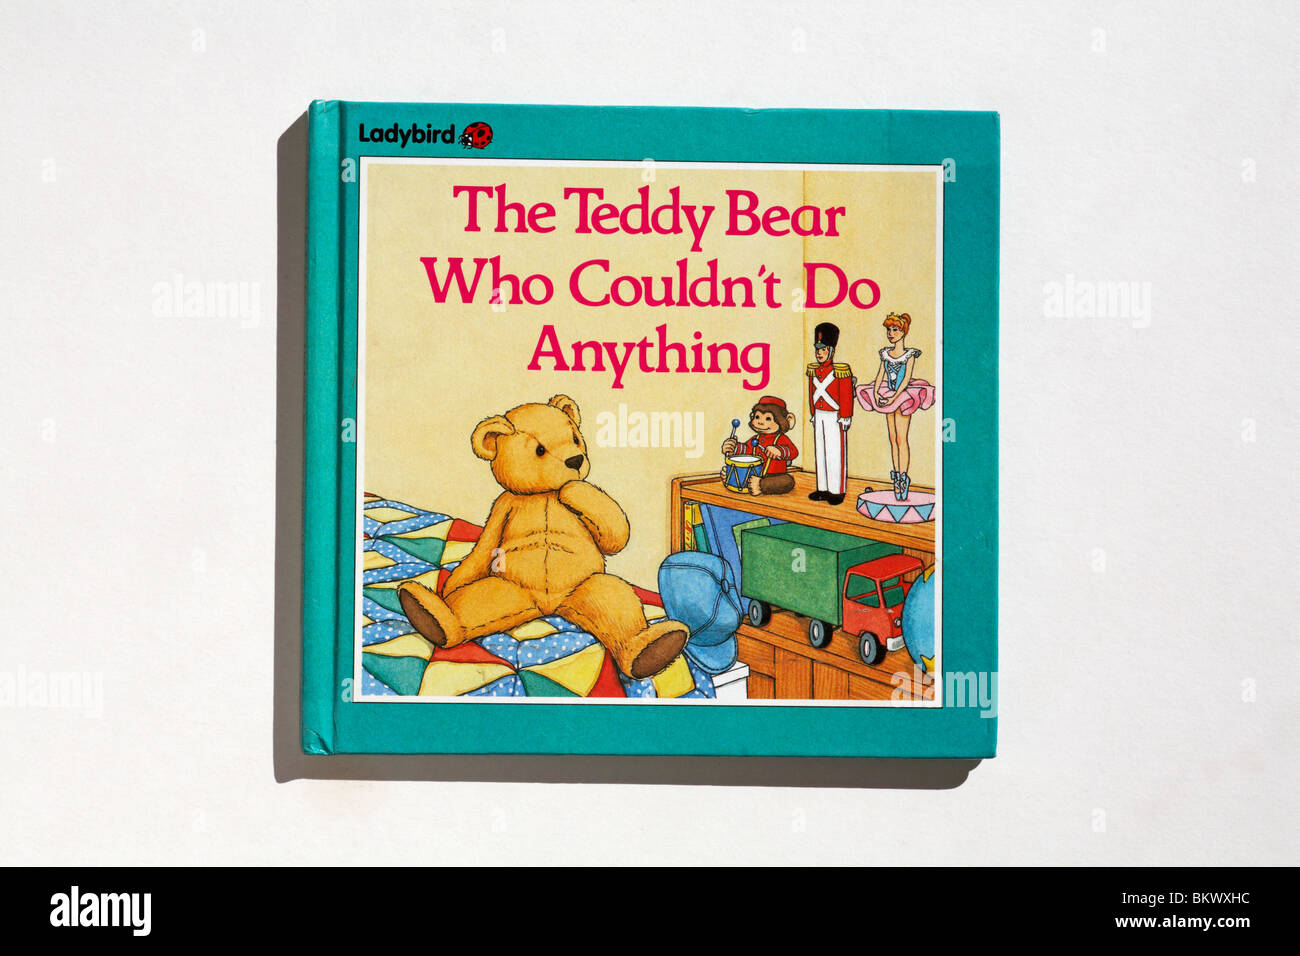 Ladybird book - The Teddy Bear Who Couldn't Do Anything isolated on white background Stock Photo